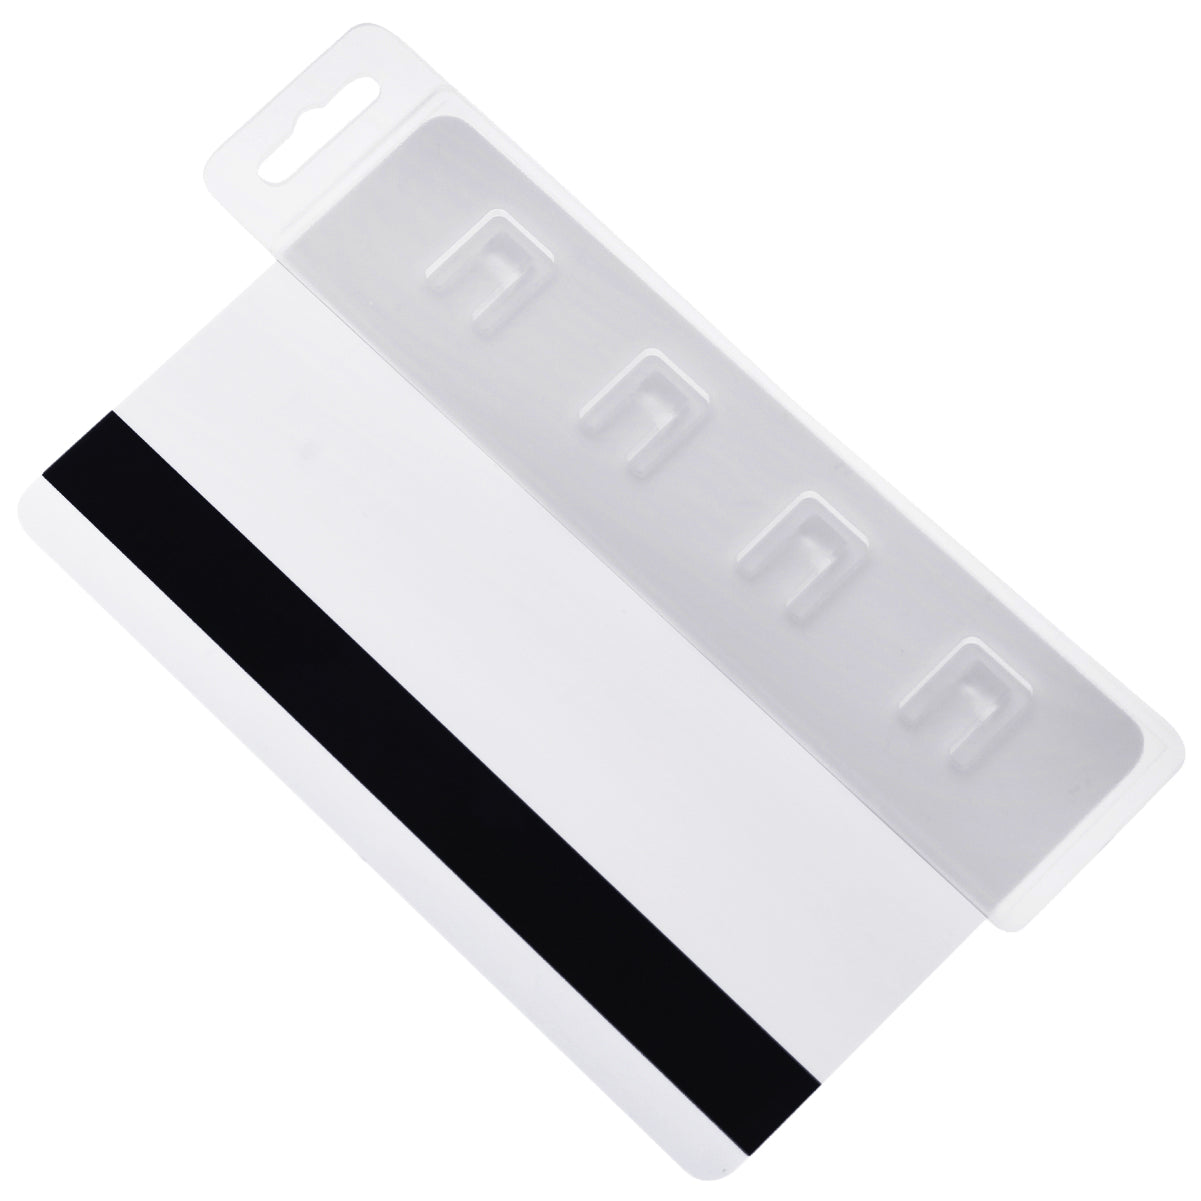 A close-up of a blank white plastic card with a black magnetic stripe on the back, partially inside a Vertical Half Card Holder for Magnetic Stripe Swipe Cards - Heavy Duty Gripper (SPID-1380) with a clear plastic sleeve and hanging tab. Ideal for professional purchasers seeking magnetic stripe swipe cards for secure access solutions.